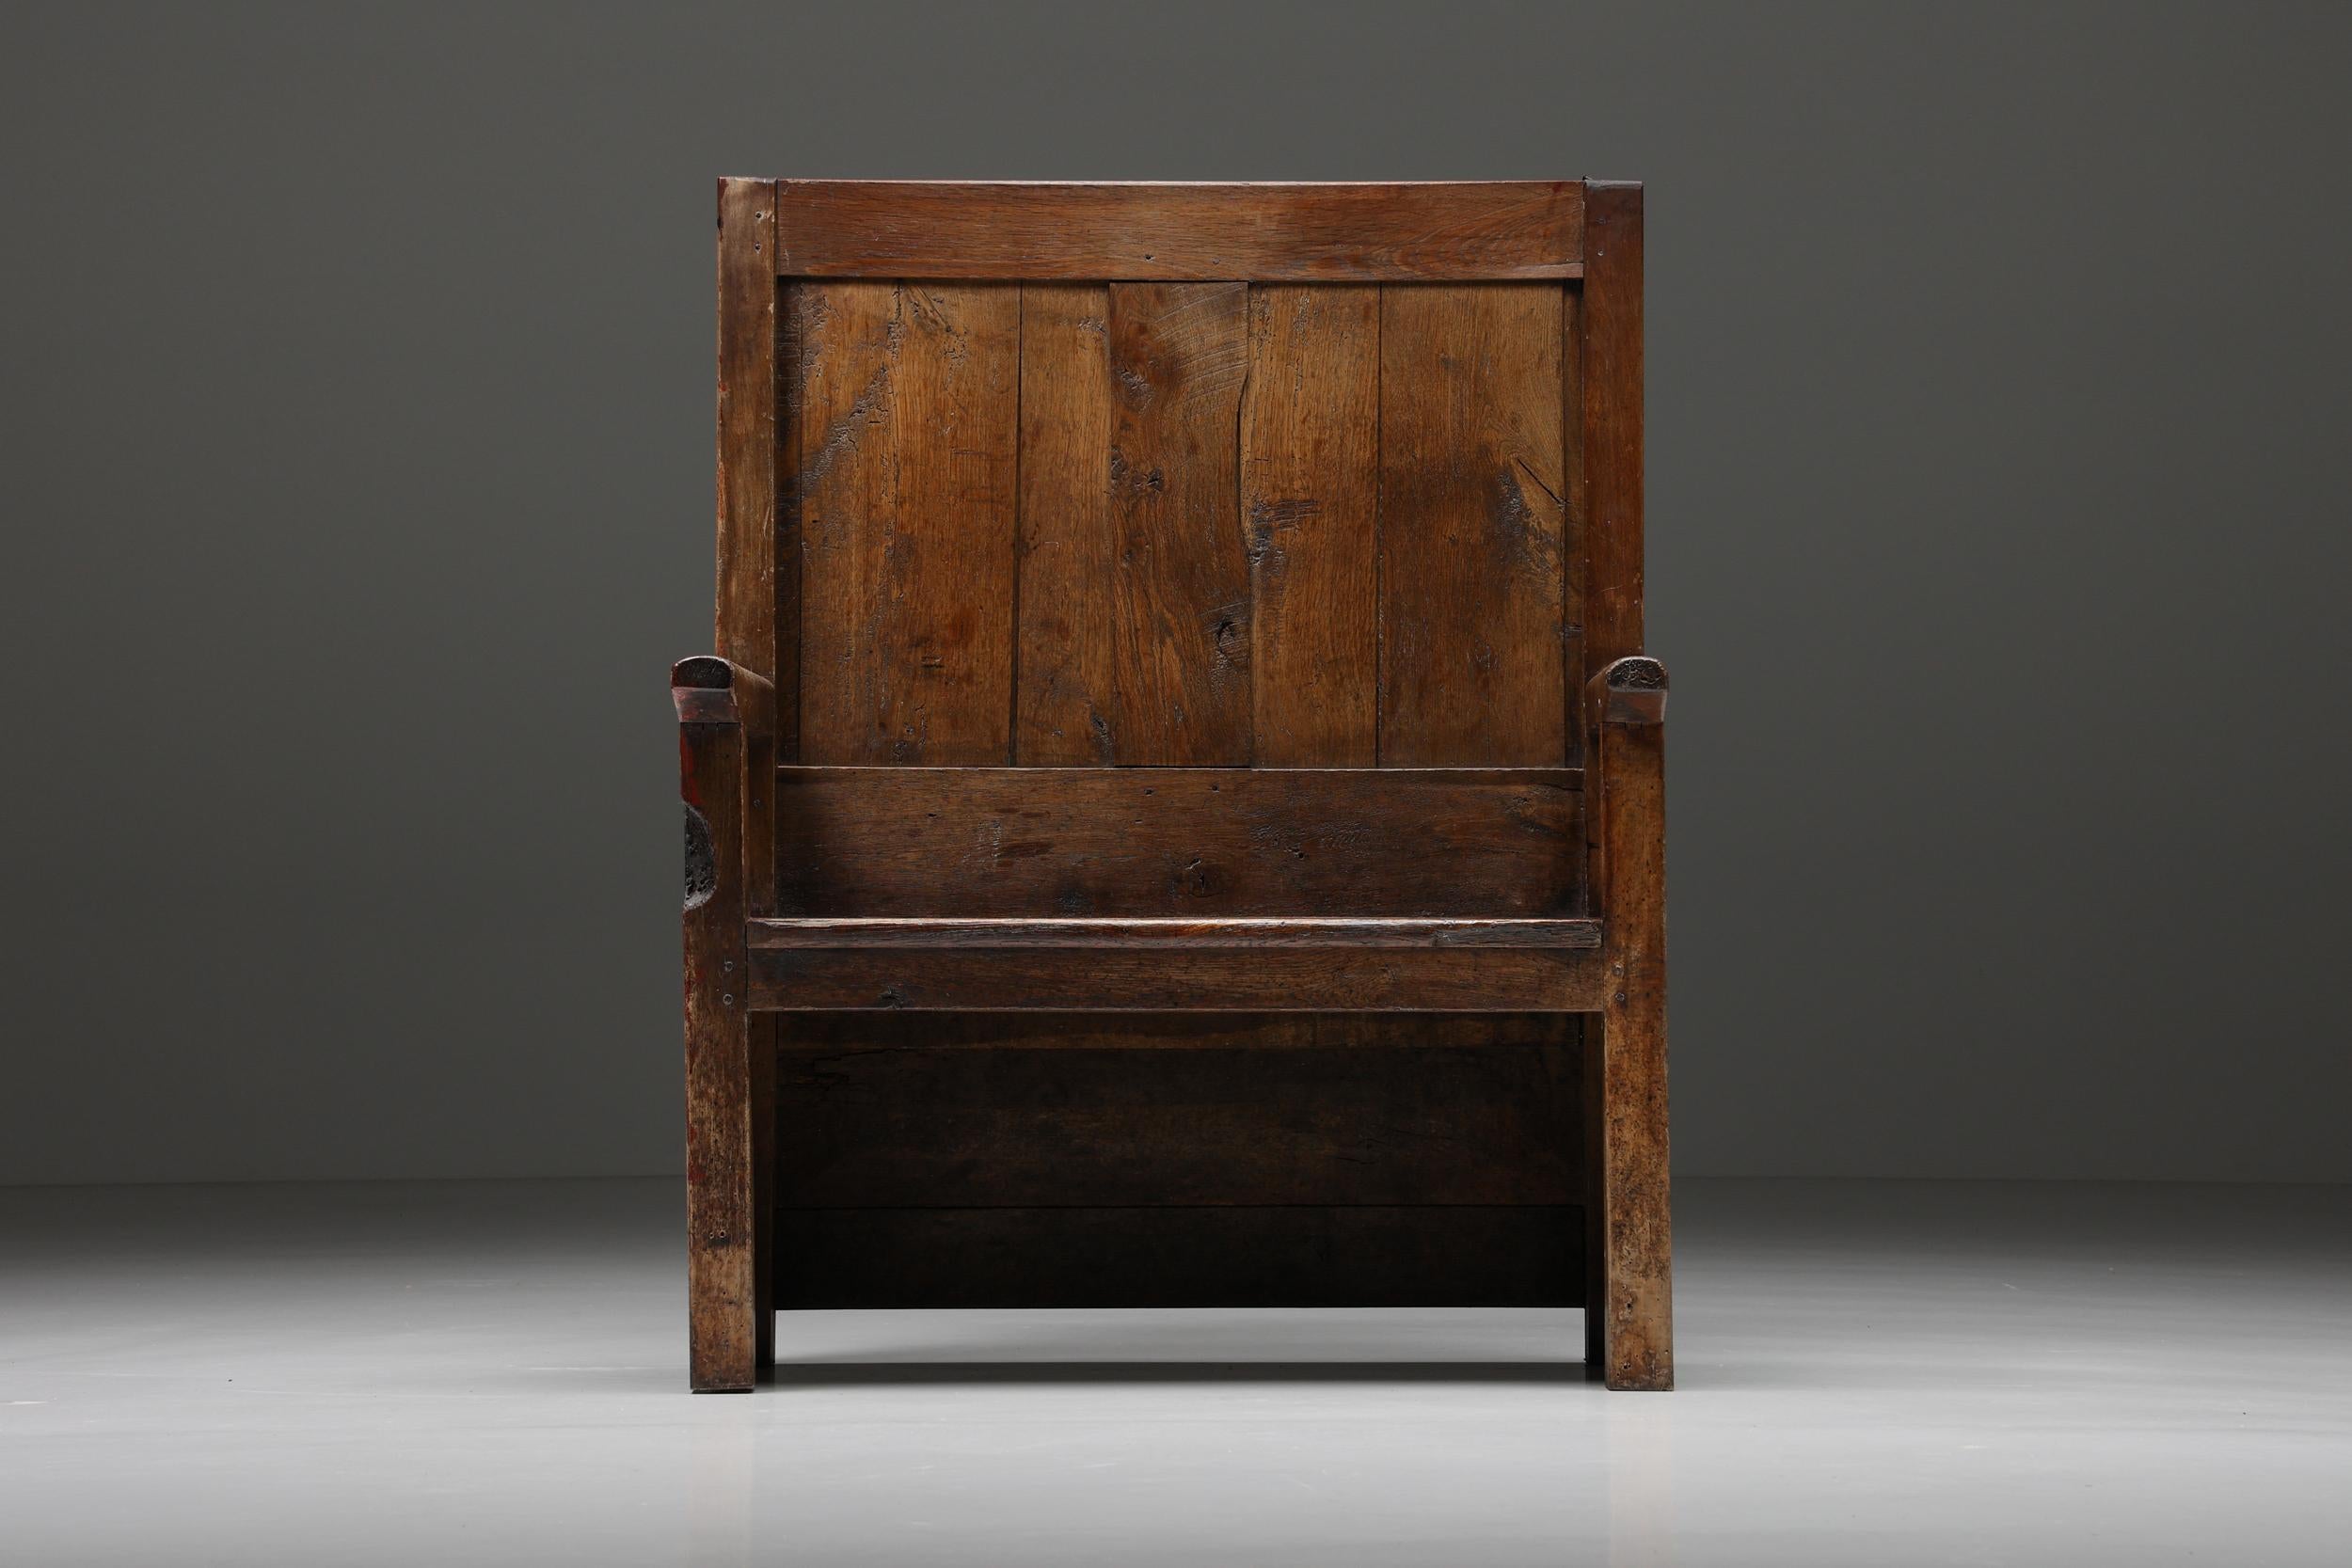 High back wooden wabi-wabi church, pray bench, modular back, Rustic, 1880's

Rustic high back wooden church or pray bench from the 1880s. The backrest has a modular element to it, as you can open two parts using a simple mechanism in wood. The